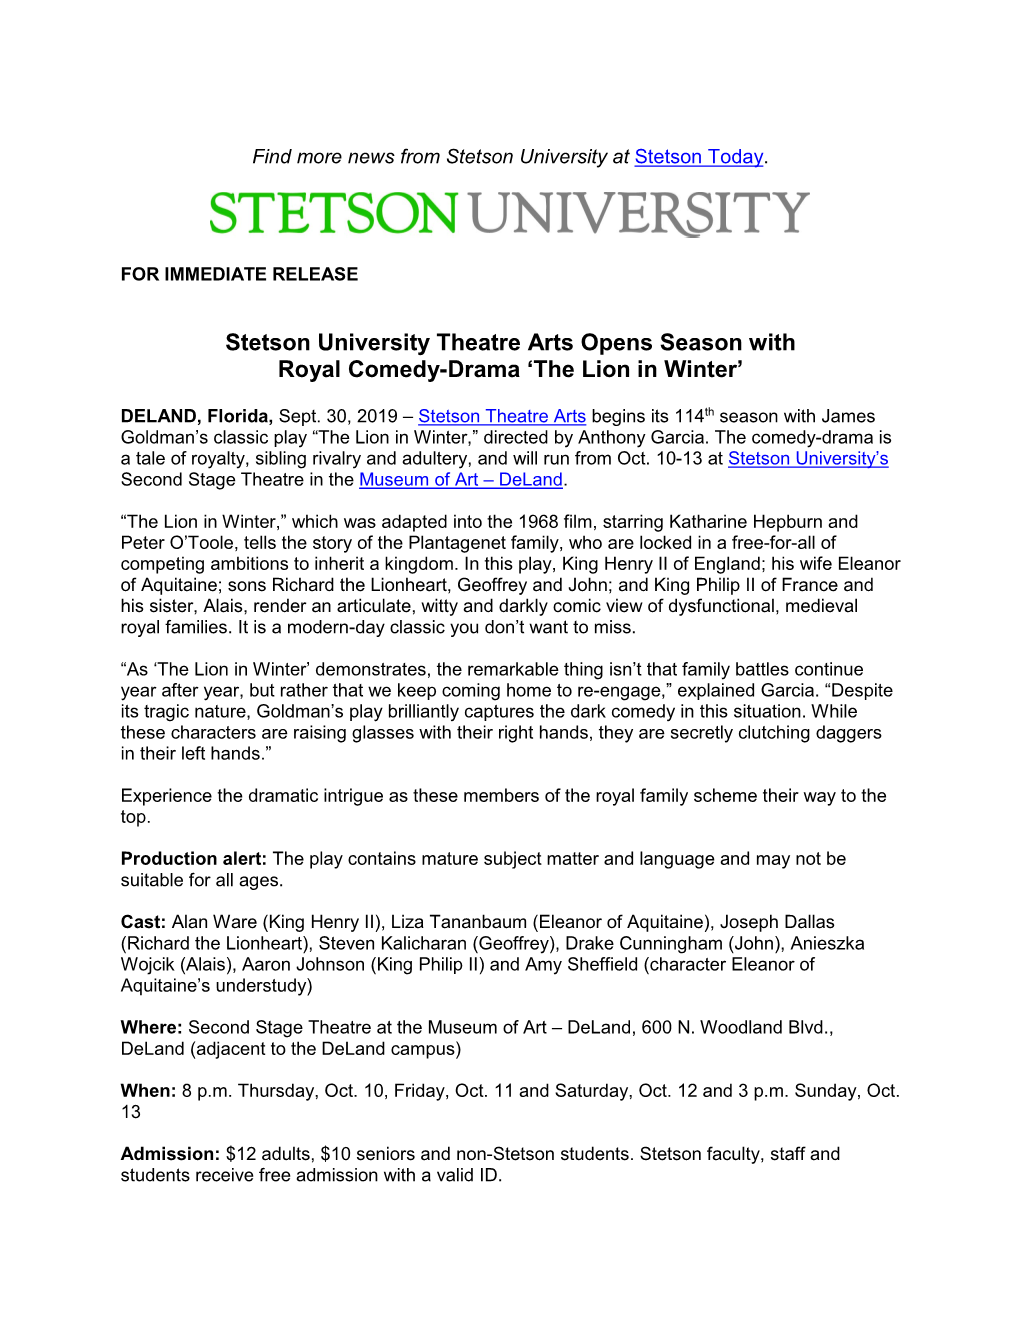 Stetson University Theatre Arts Opens Season with Royal Comedy-Drama ‘The Lion in Winter’